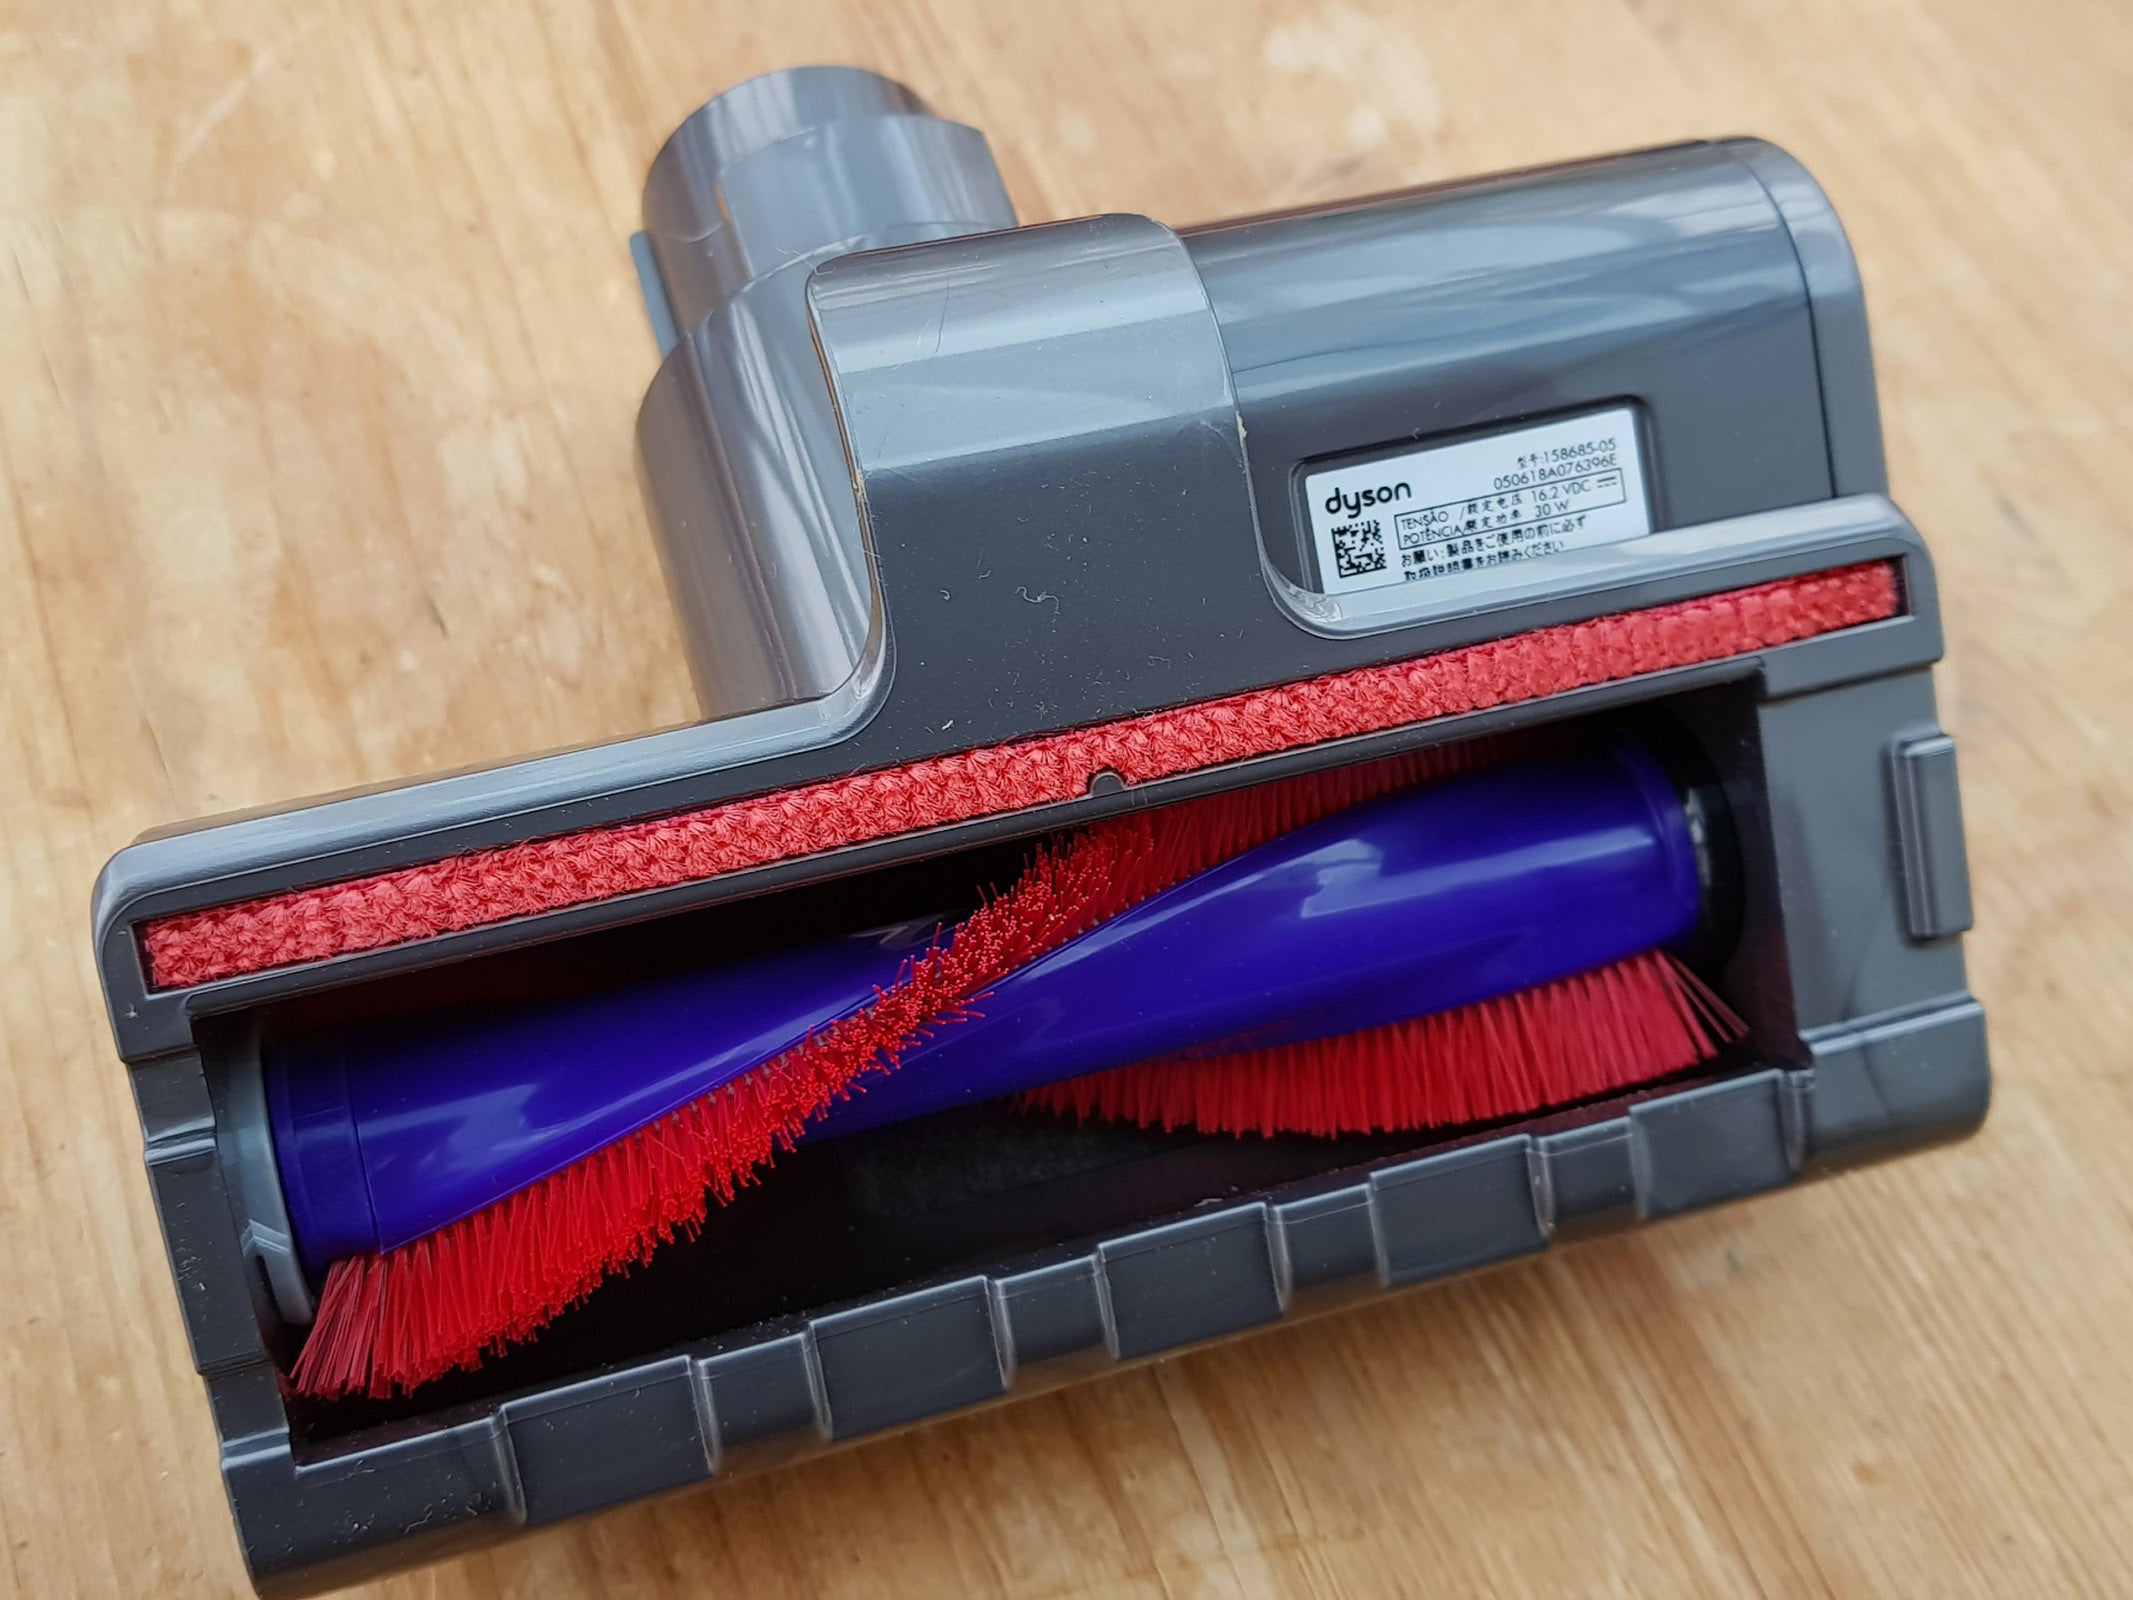 Dyson Cyclone V10 Absolute vacuum cleaner head on wooden surface